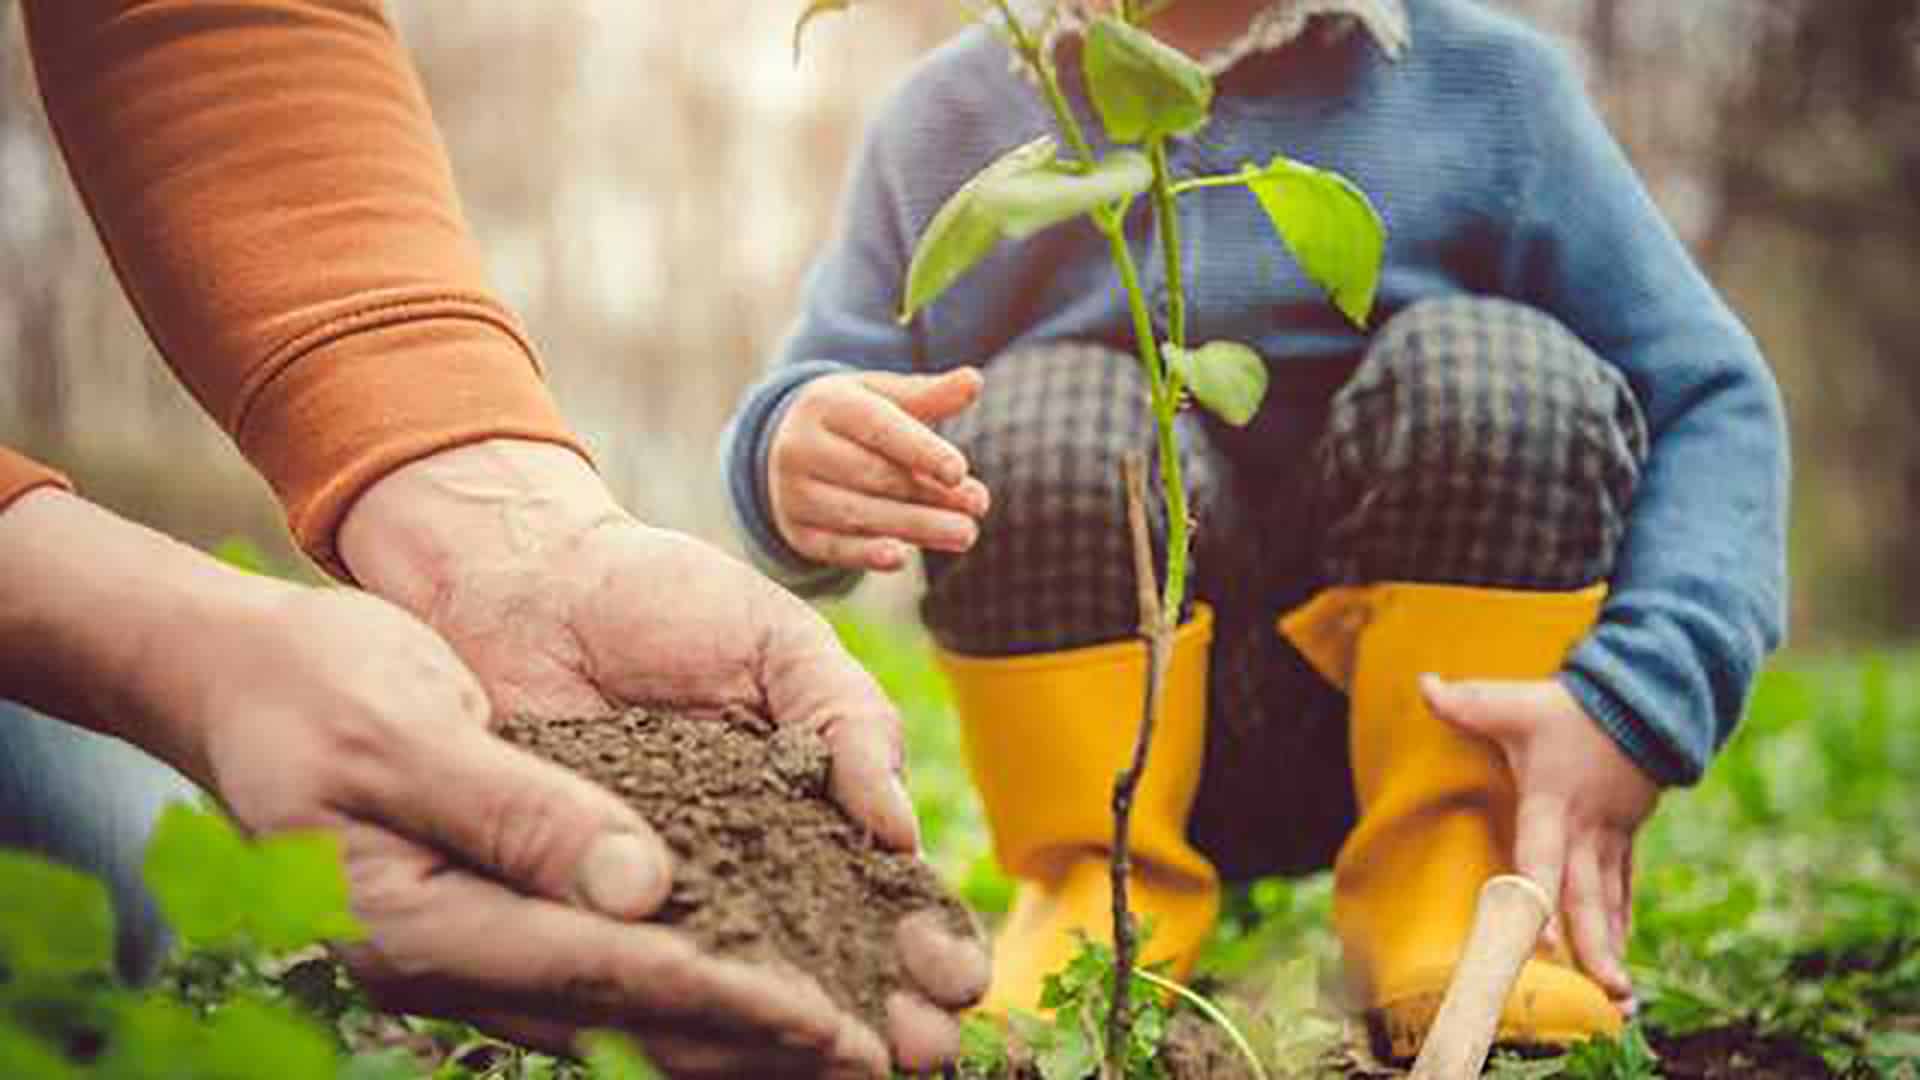 Man planting small tree with child watching